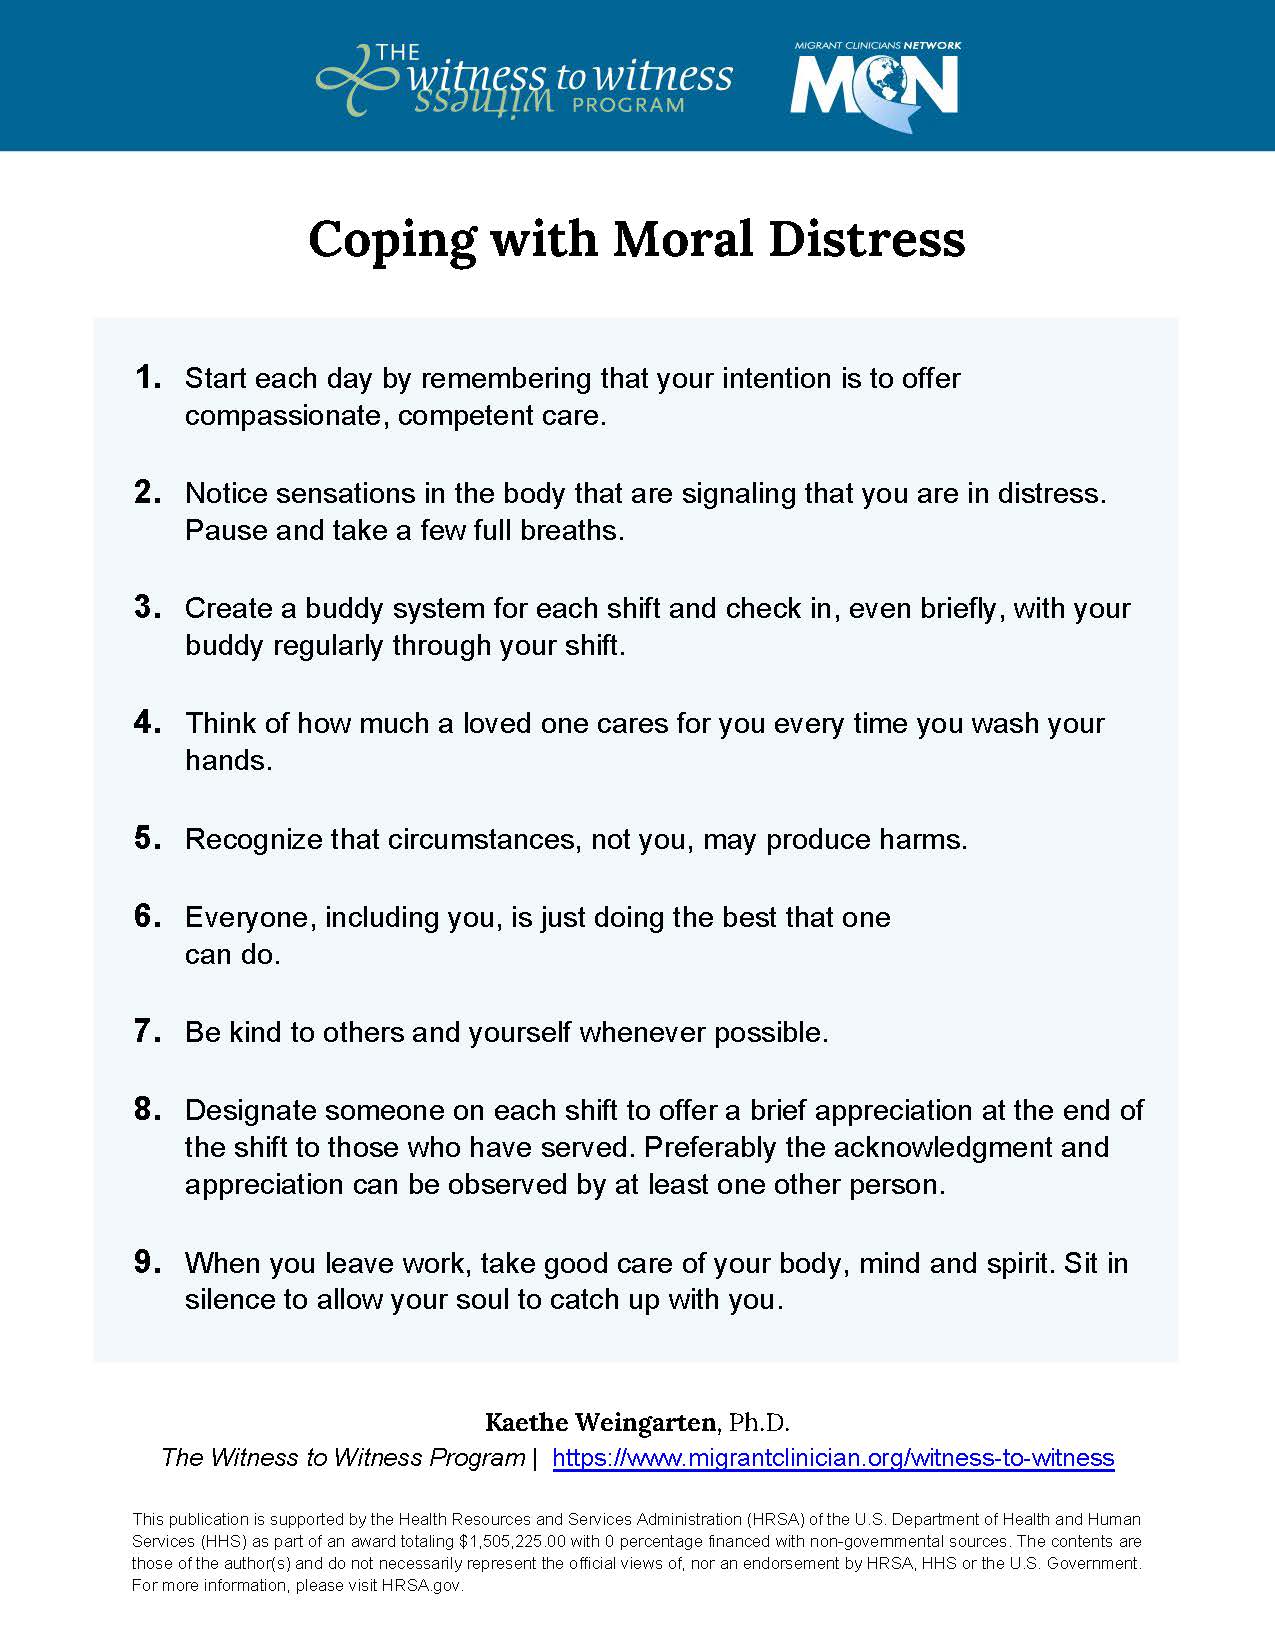 Coping with Moral Distress Handout